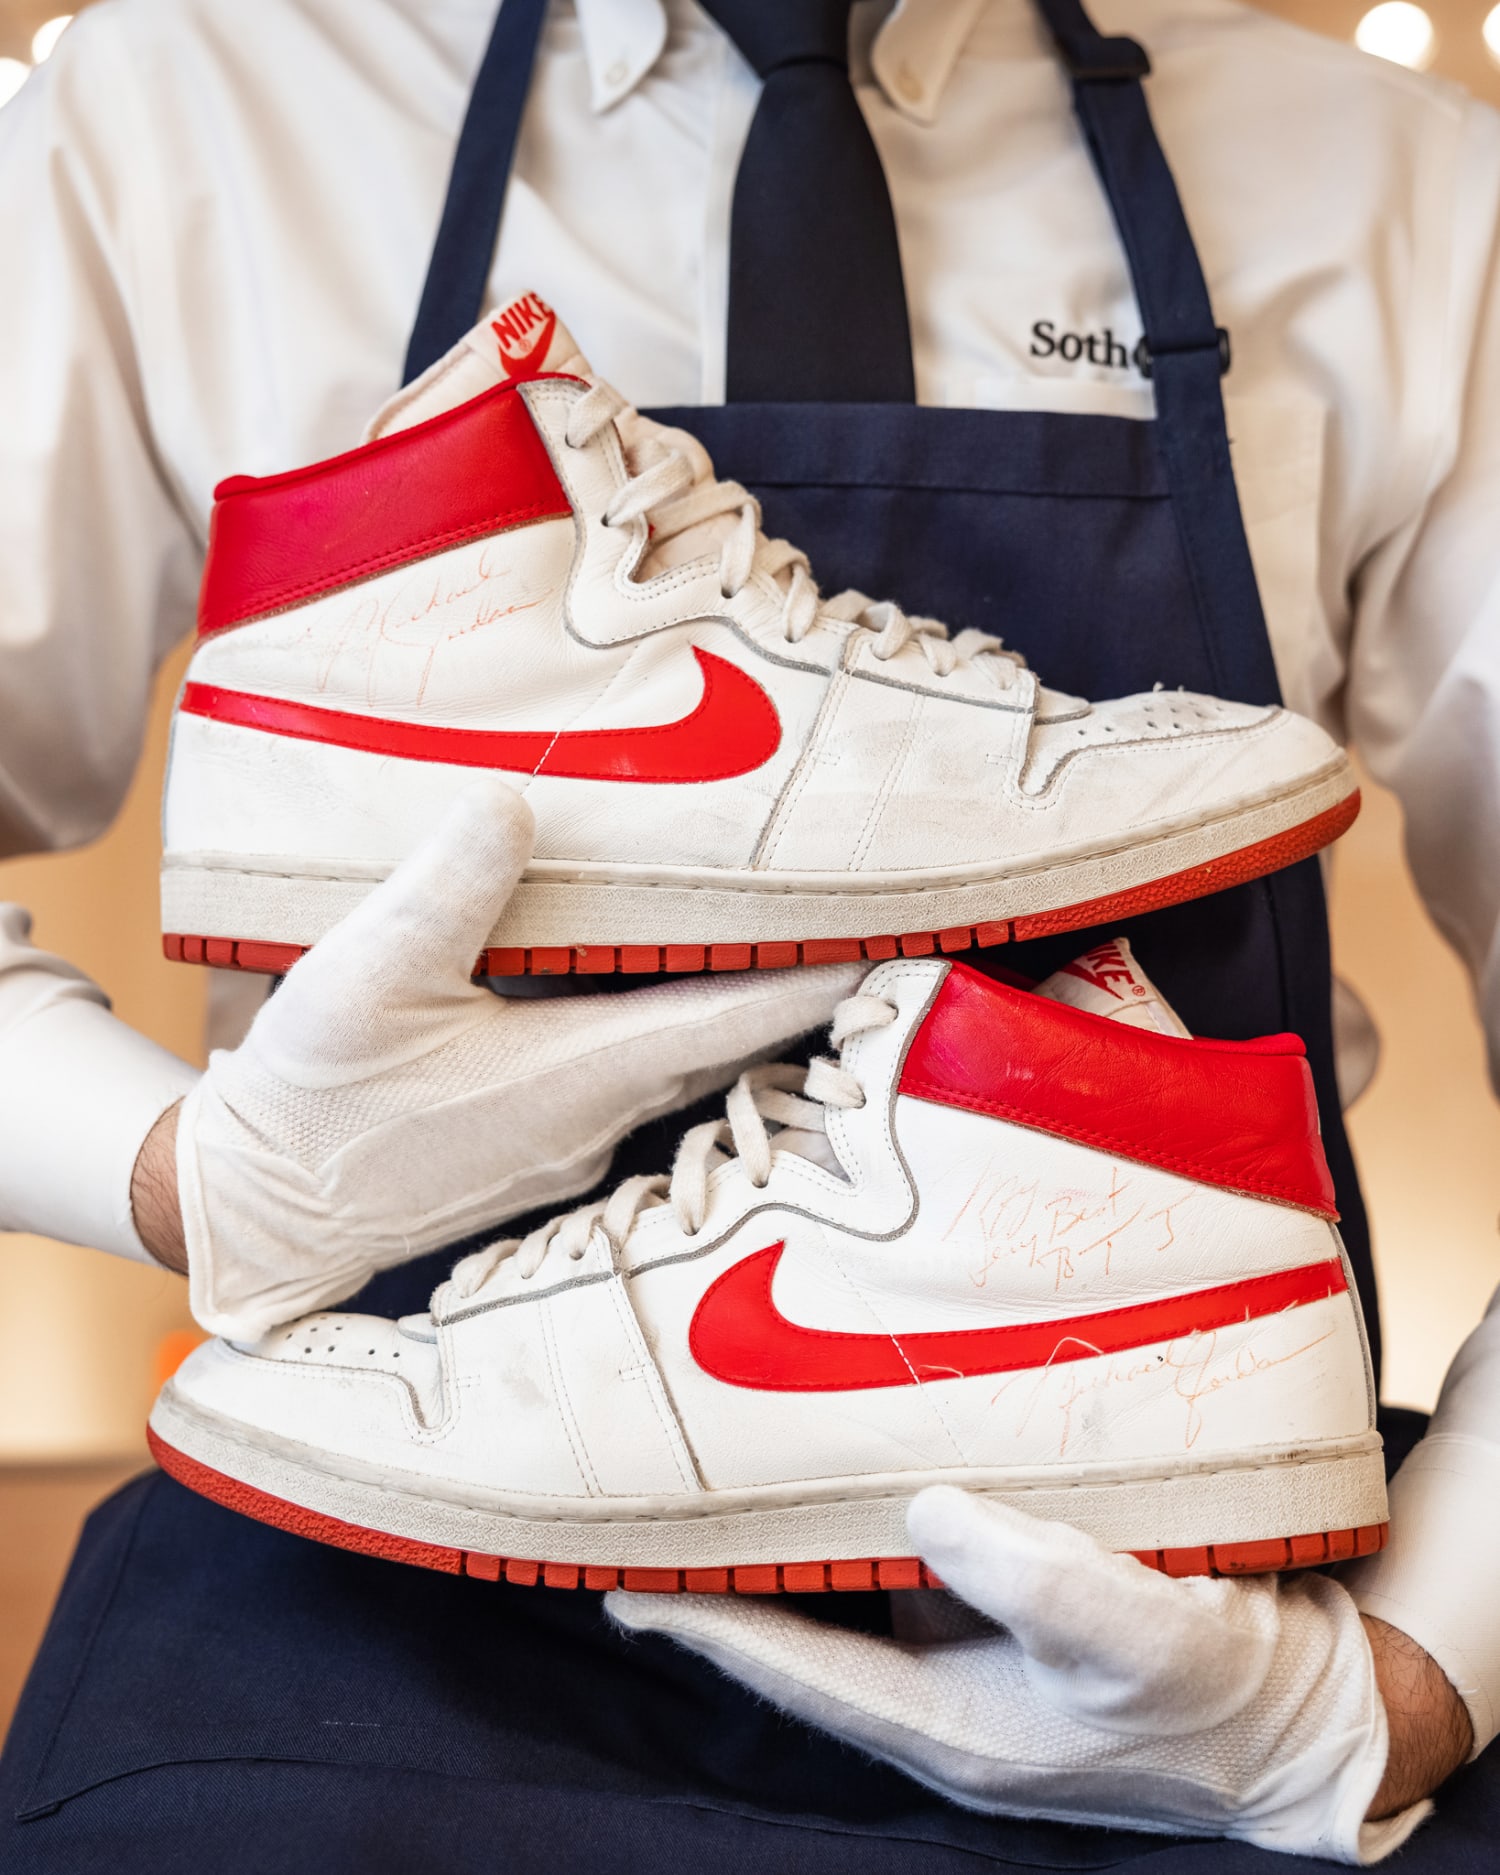 Respond Contractor tornado Michael Jordan's 1984 Nike Air Ships sell for record $1.5M at Sotheby's